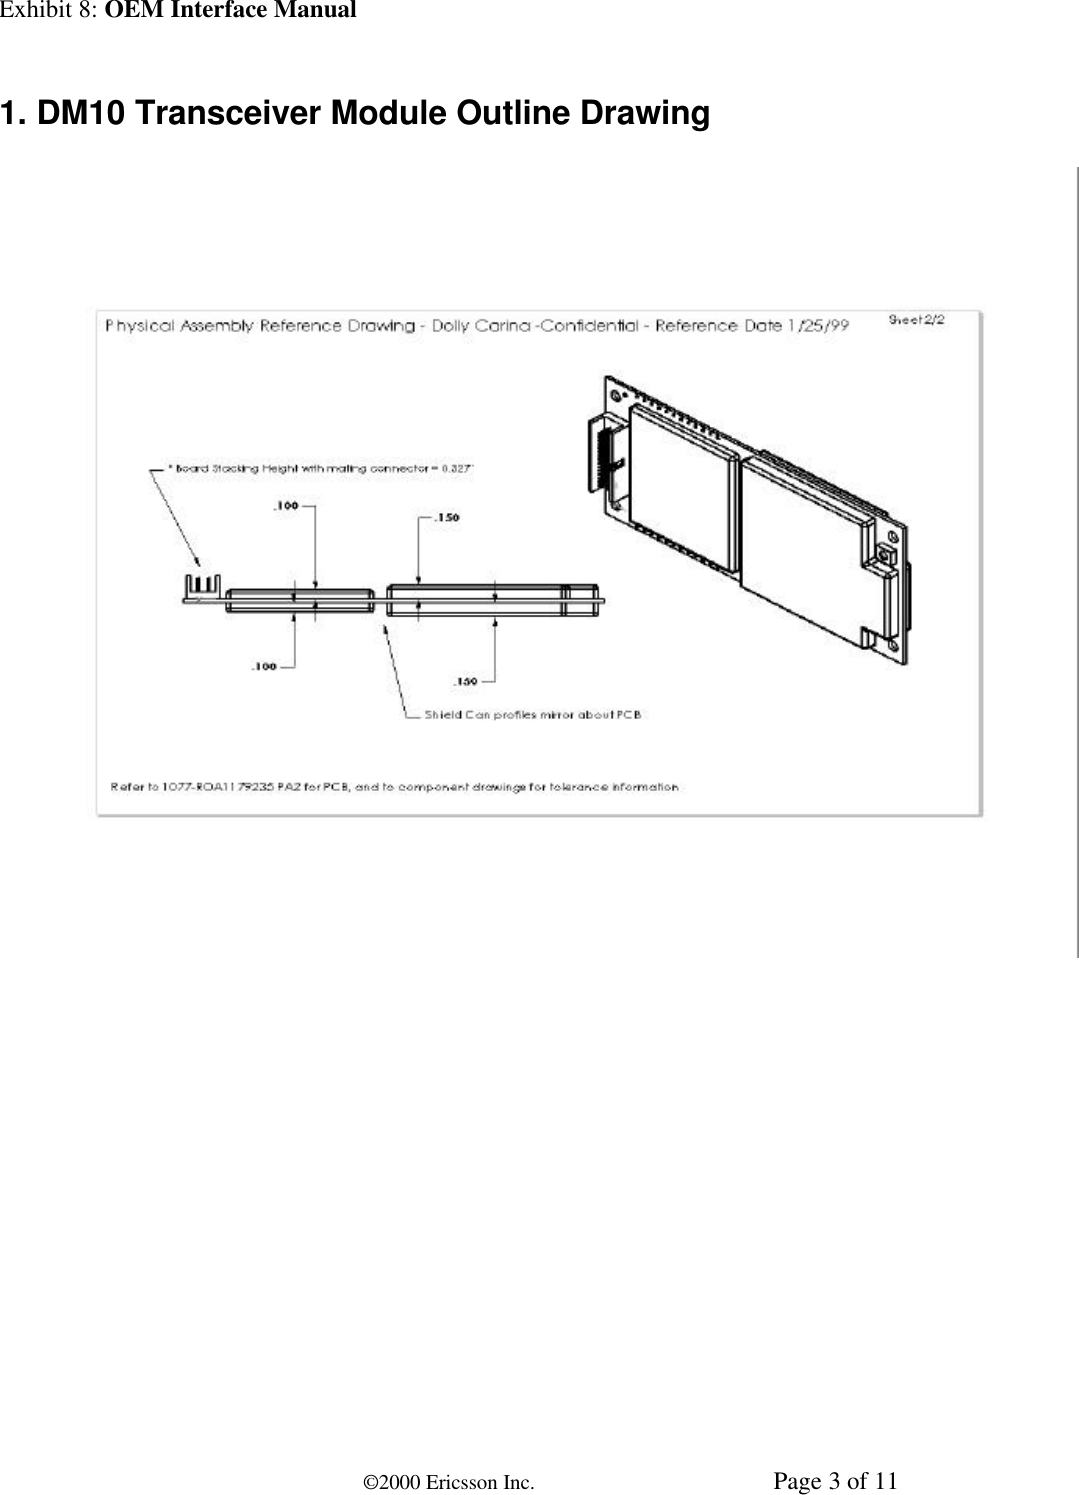 Exhibit 8: OEM Interface Manual©2000 Ericsson Inc. Page 3 of 111. DM10 Transceiver Module Outline Drawing